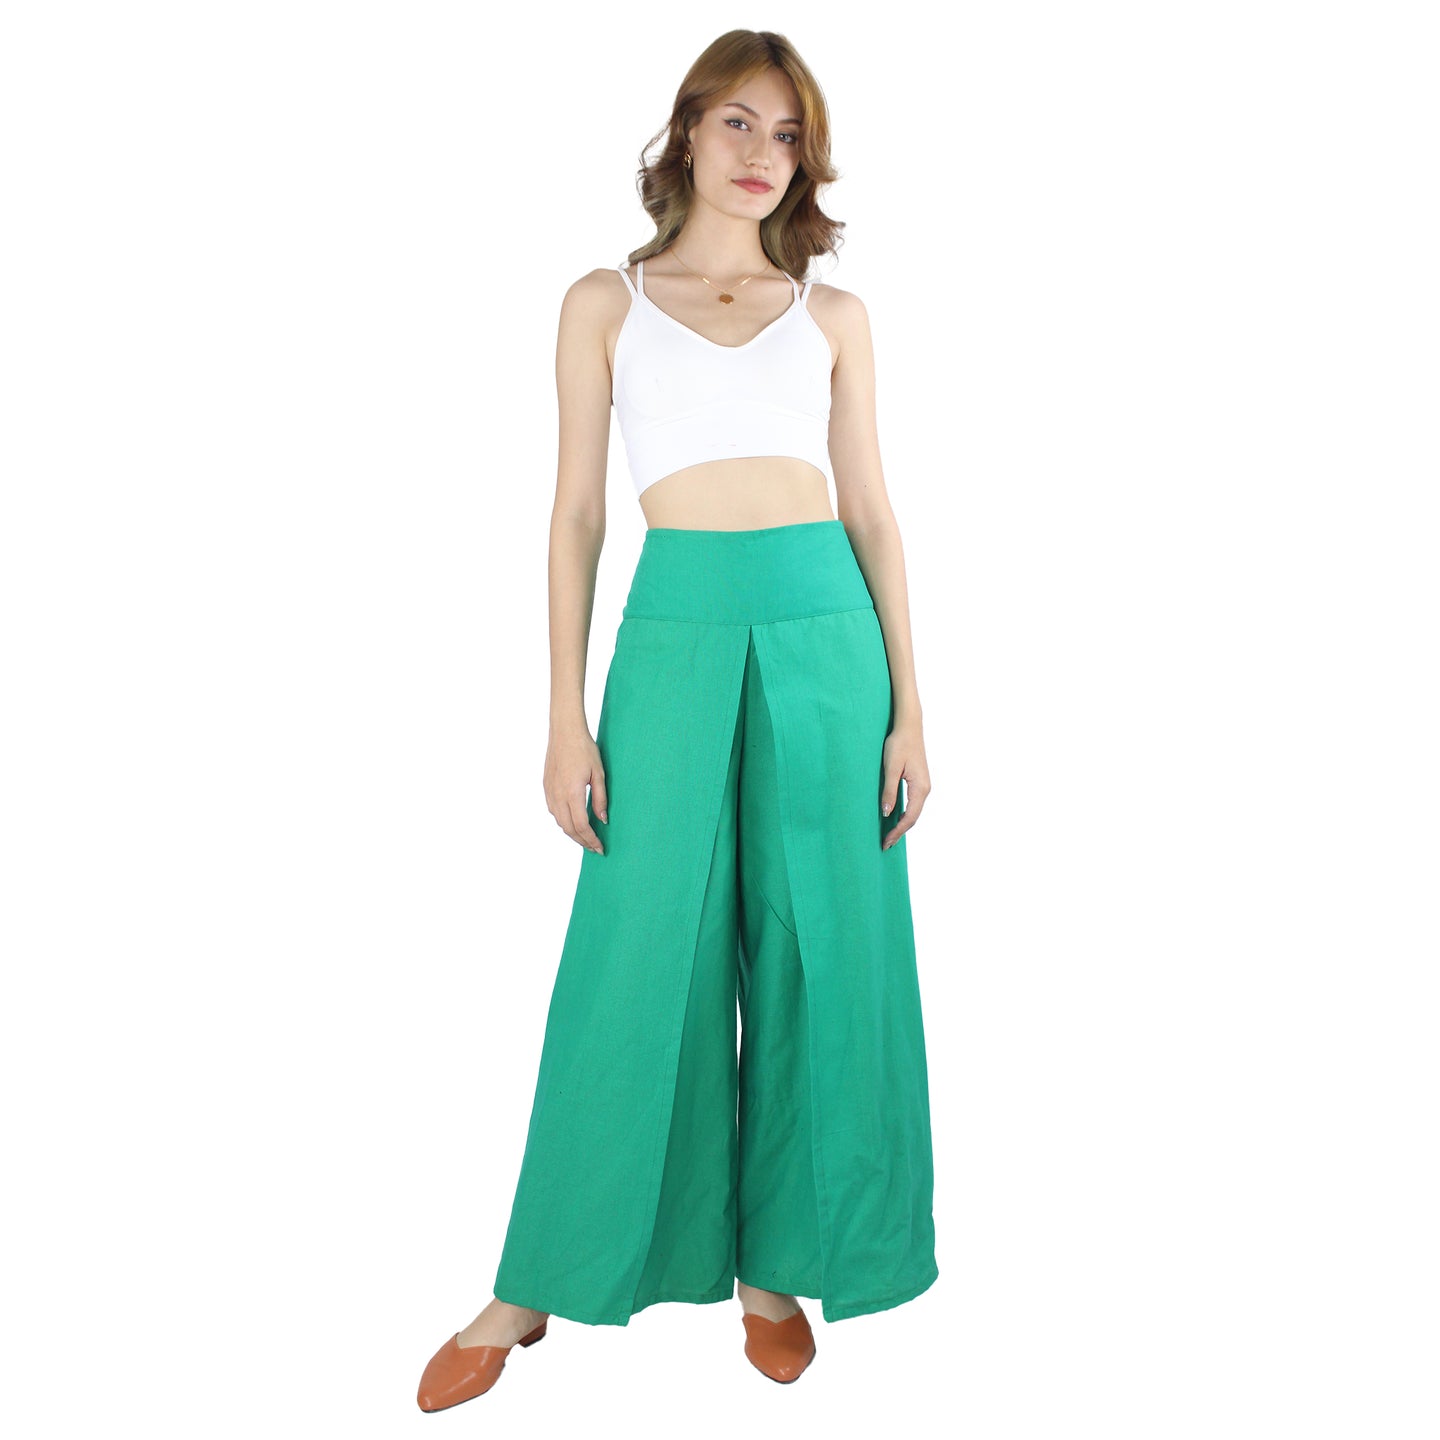 Solid Color Light Cotton Palazzo Pants in Green PP0076 010000 20